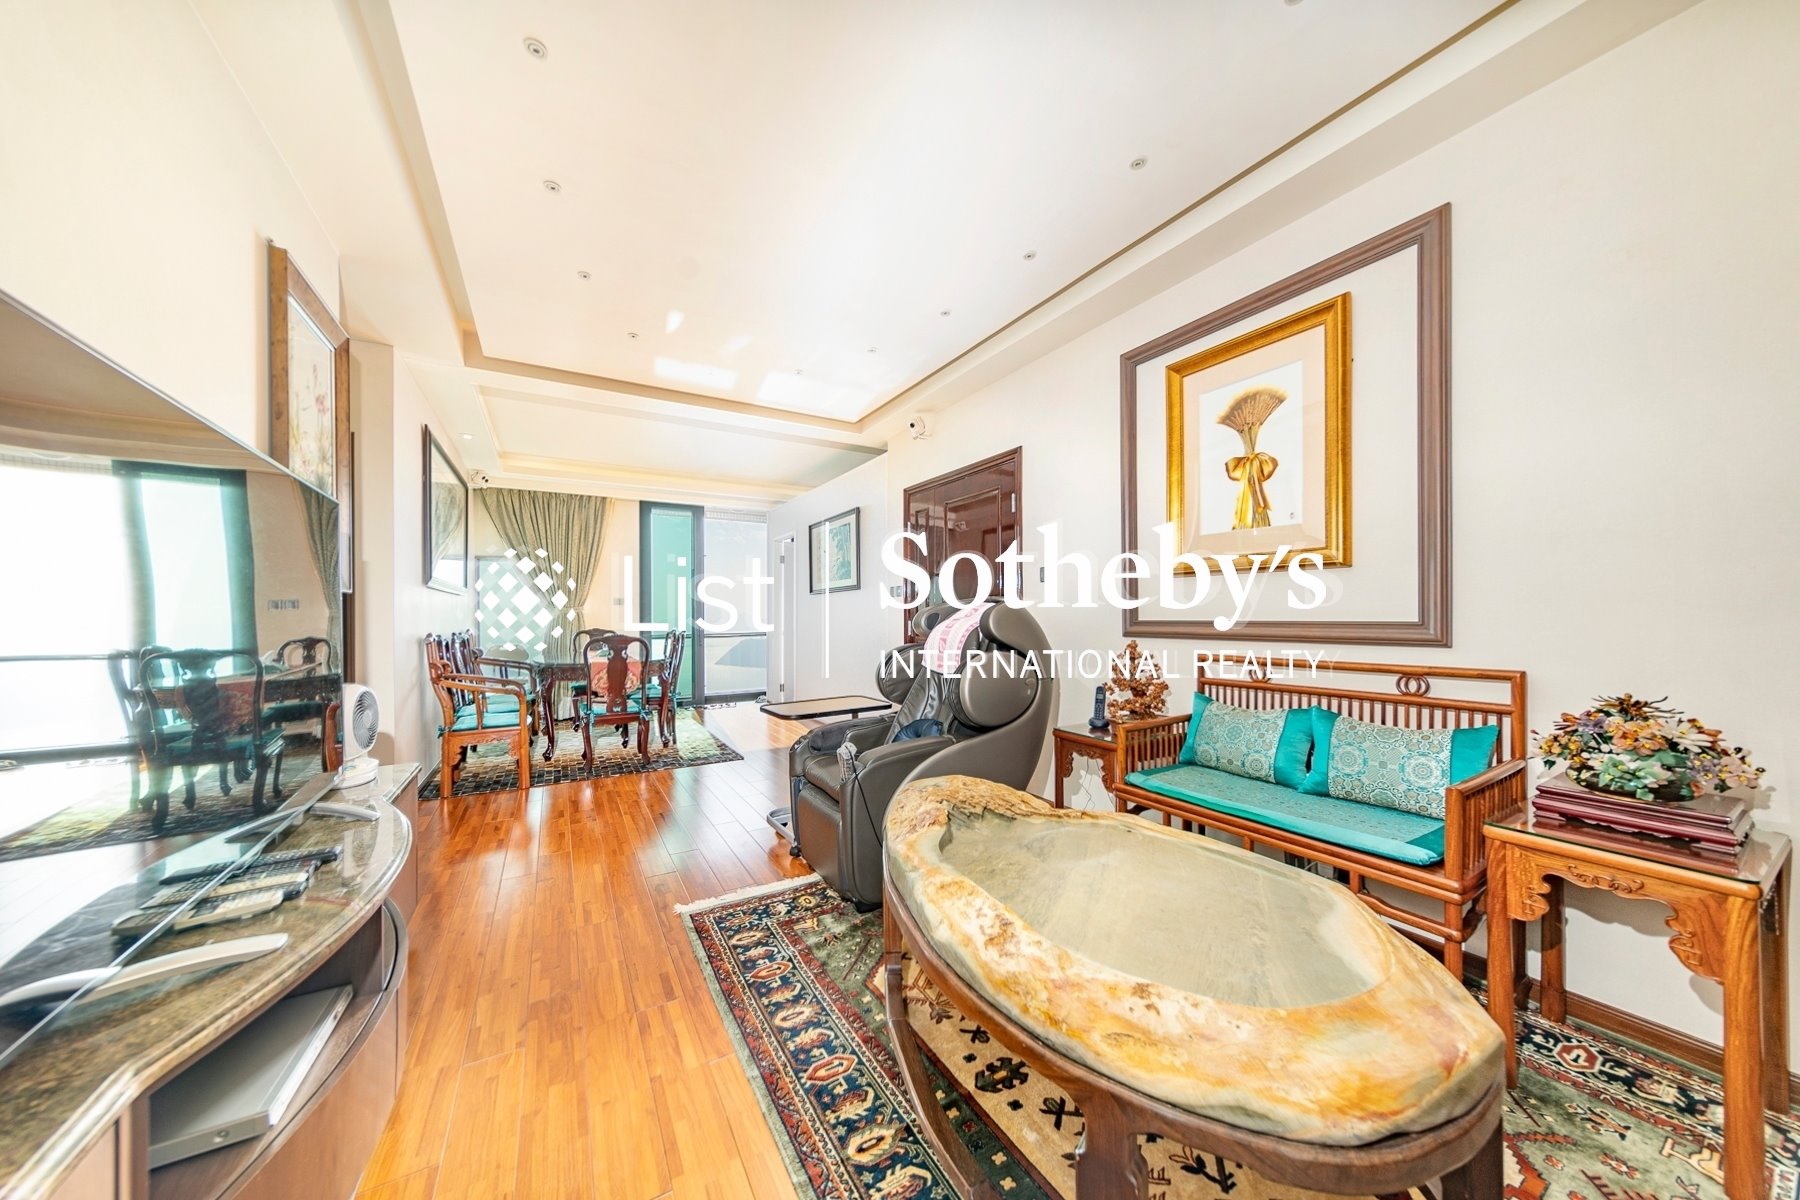 No. 37 Repulse Bay Road 淺水灣道37號 | Living and Dining Room